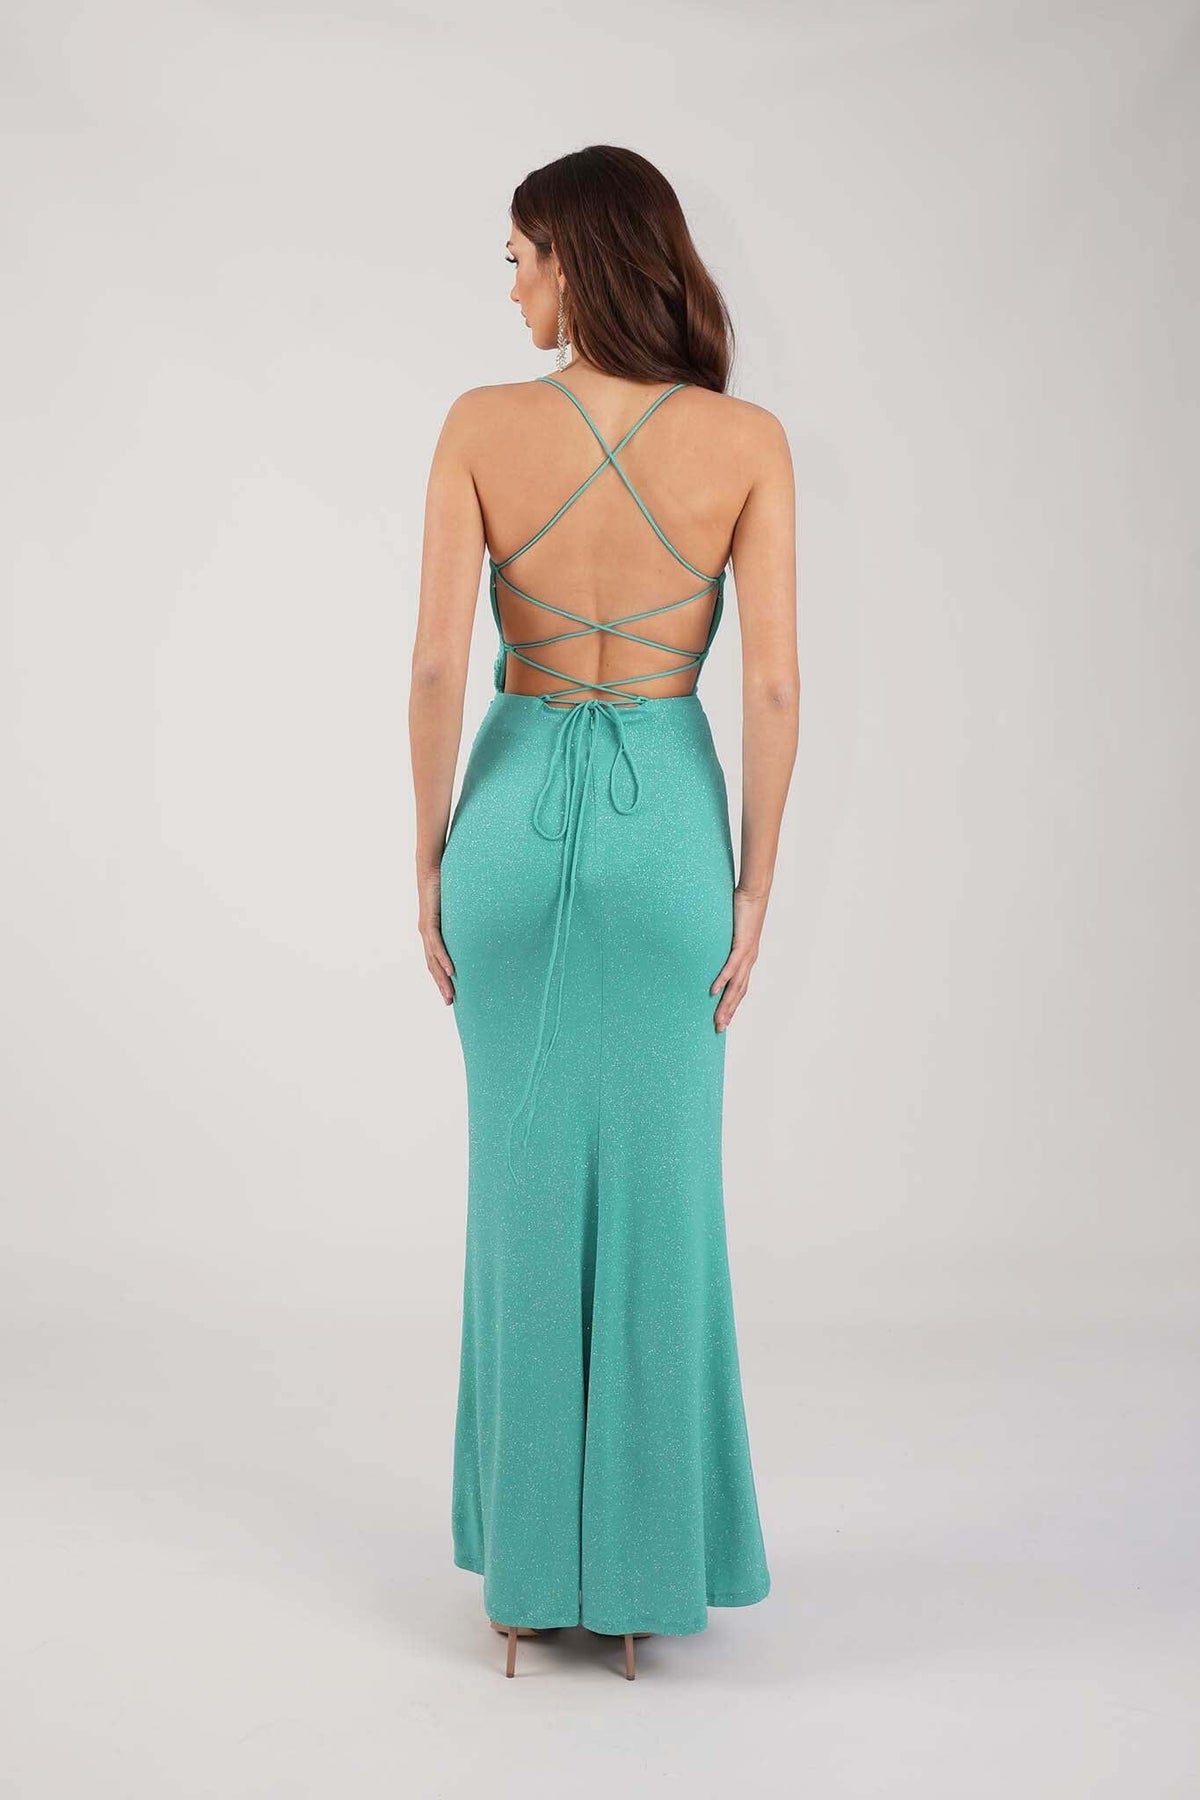 Lace Up Open Back Design of Mint Green Shimmer Evening Gown with V Neckline, Thin Straps, Gathered Detail and Side Slit